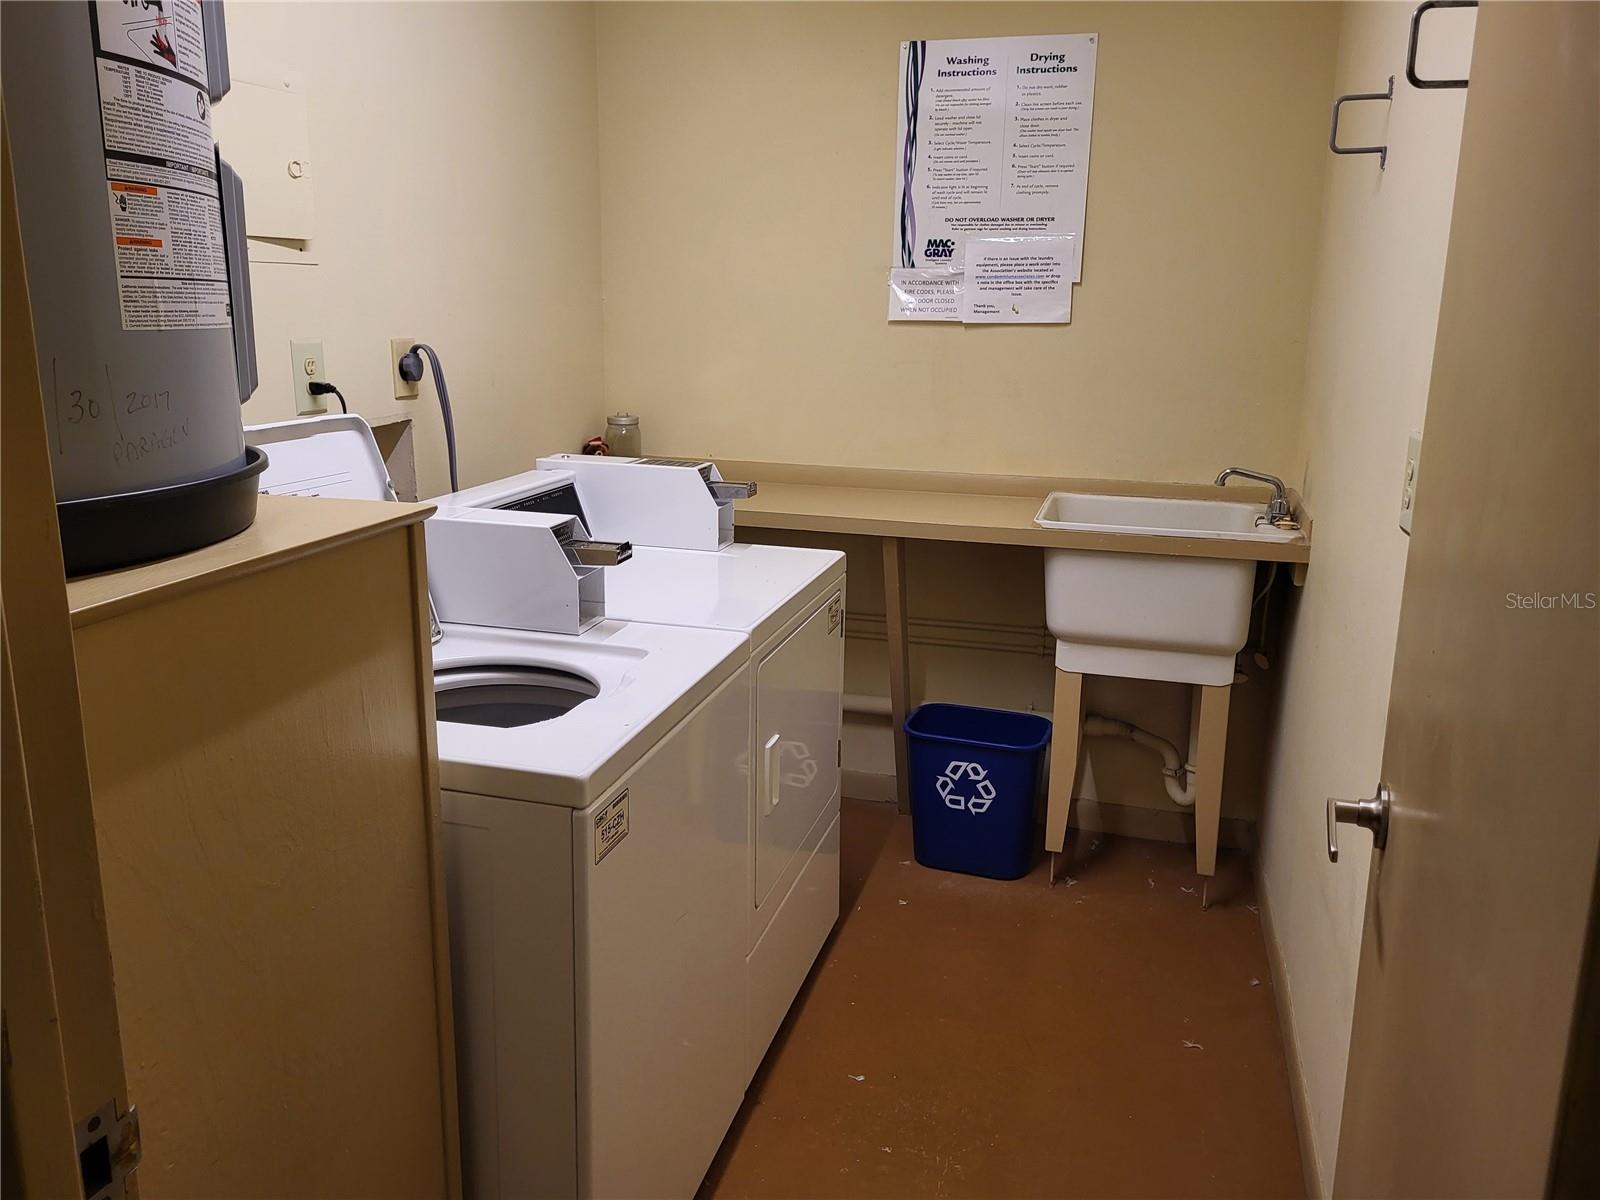 Laundry room on eighth floor just down the hall from unit 803